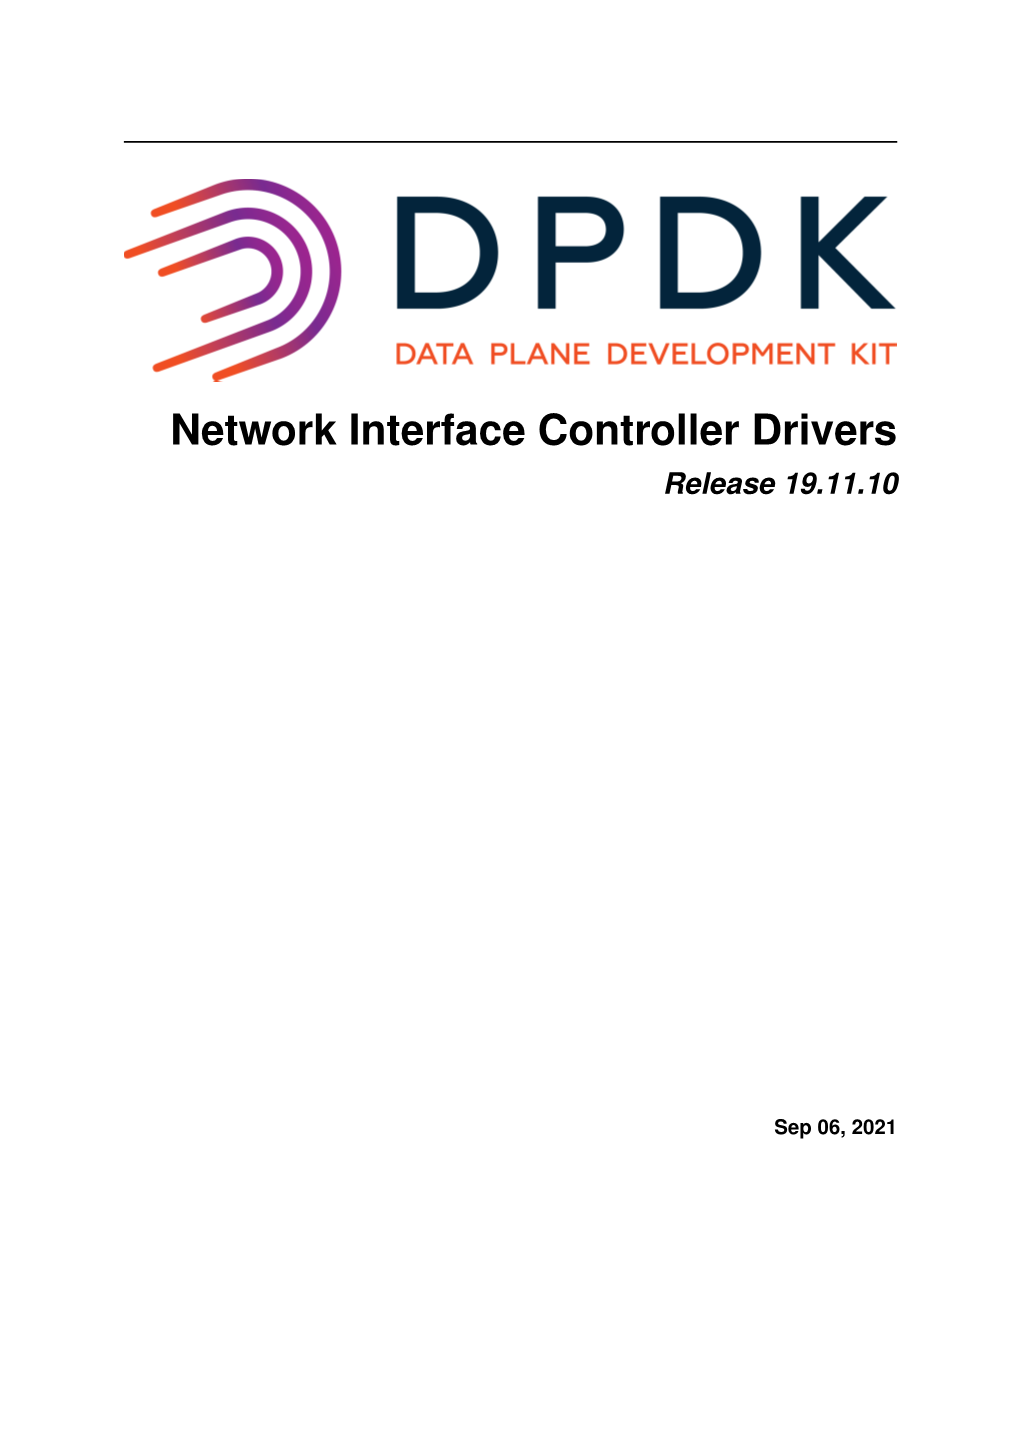 Network Interface Controller Drivers Release 19.11.10